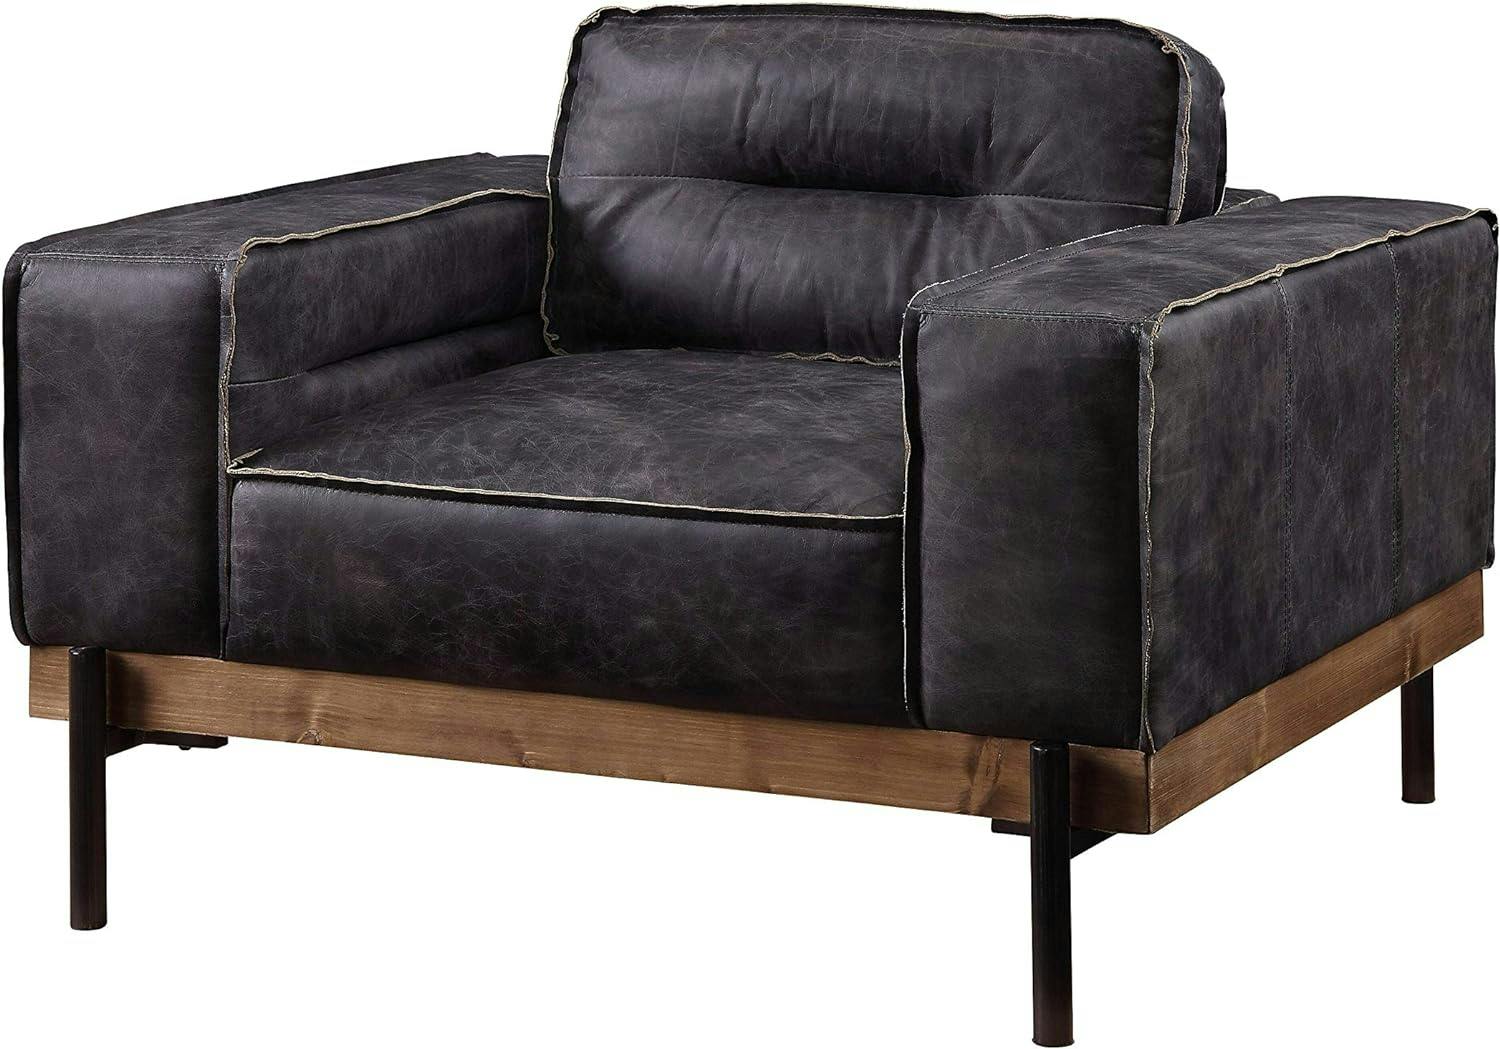 Silchester Antique Ebony Top Grain Leather Armchair with Metal Legs